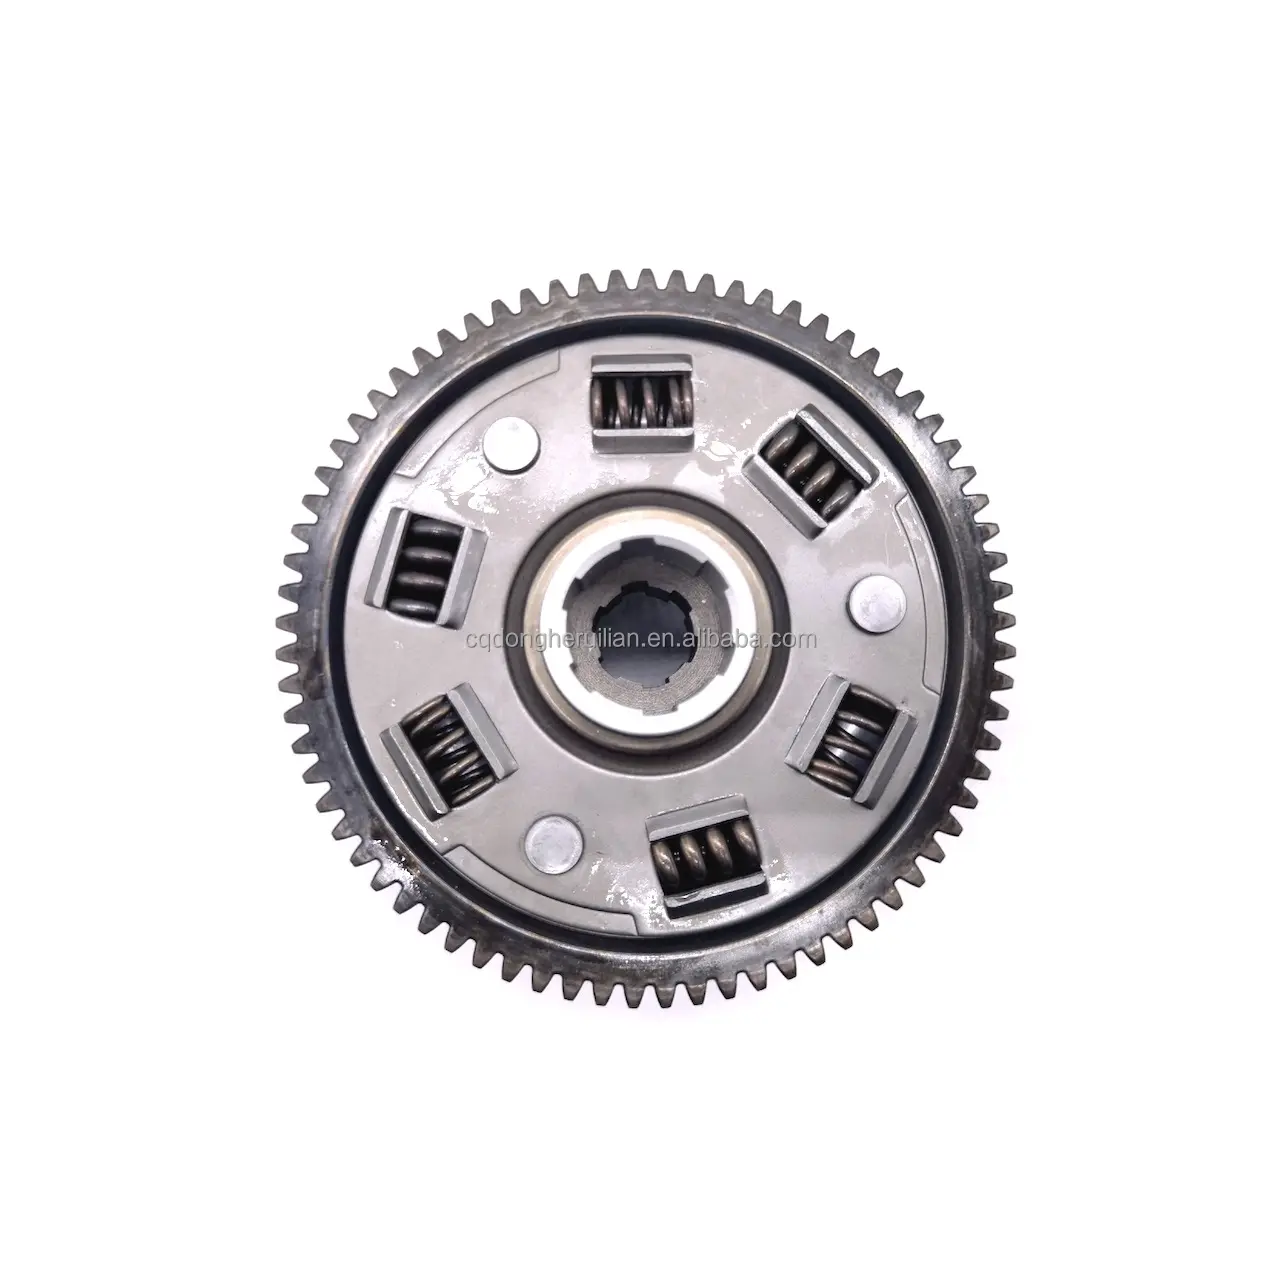 CG250 Motorcycle Pressure Plate Clutch Assembly